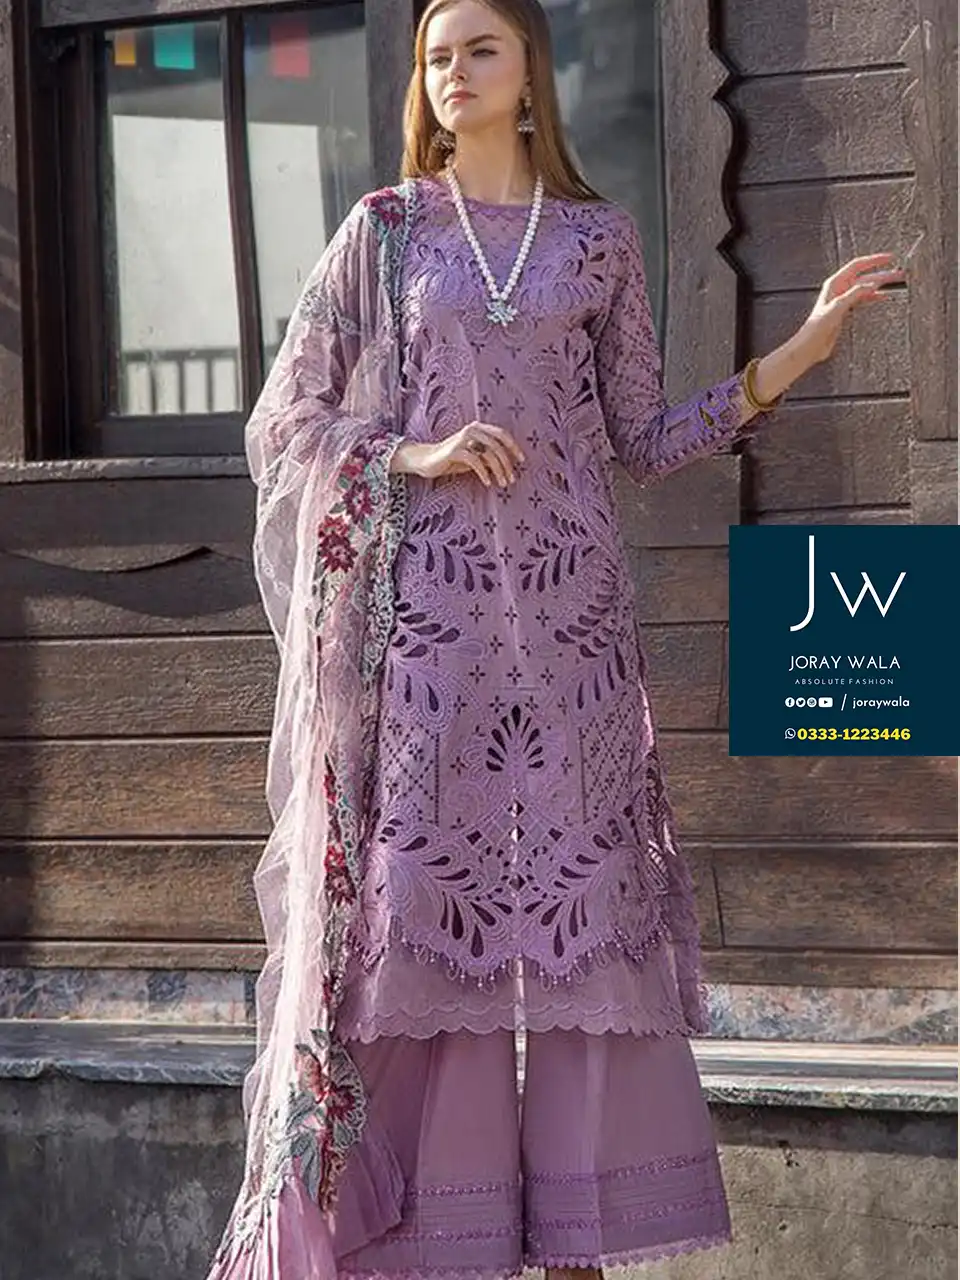 Partywear Fancy Embroidered Chickankari 5556-24 Adan libas 3pcs suit with free delivery available at joraywala